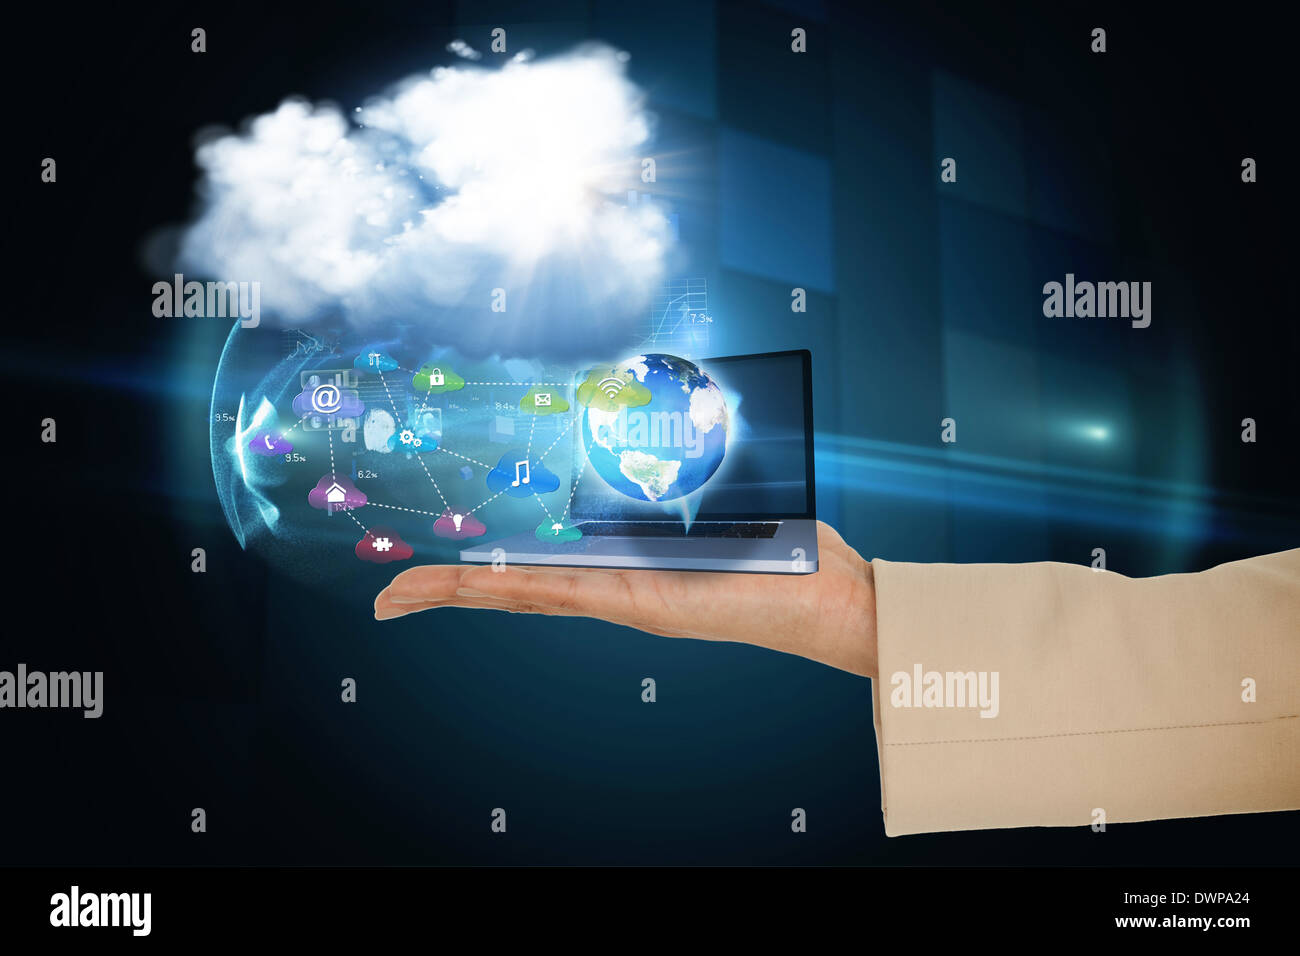 Hand presenting cloud and app icons with laptop Stock Photo